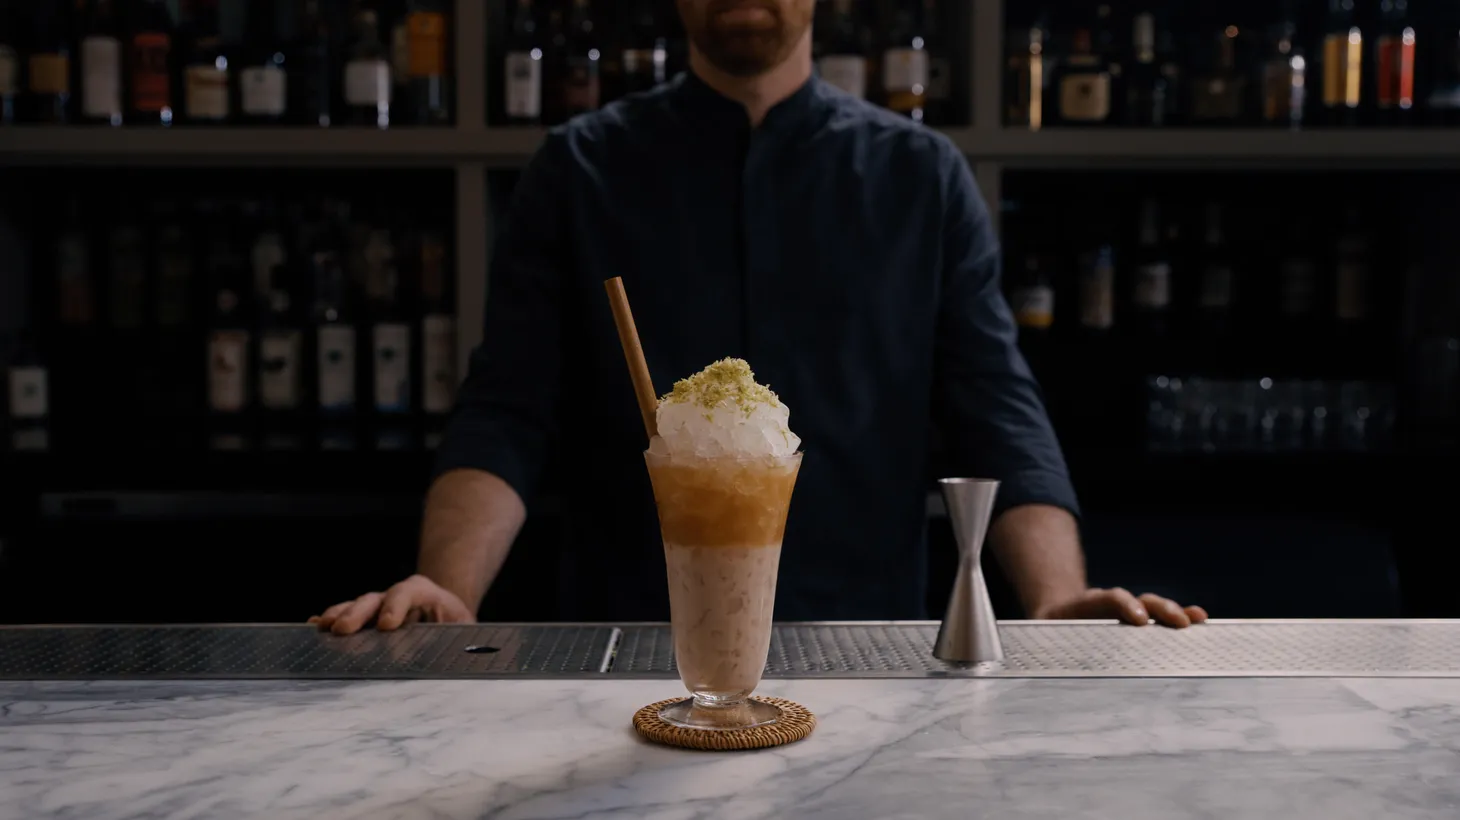 Austin Hennelly stands behind the Amakaze Swizzle, made with masala chai, coconut, almond, and lime. At Kato, he has created a non-alcoholic beverage pairing.